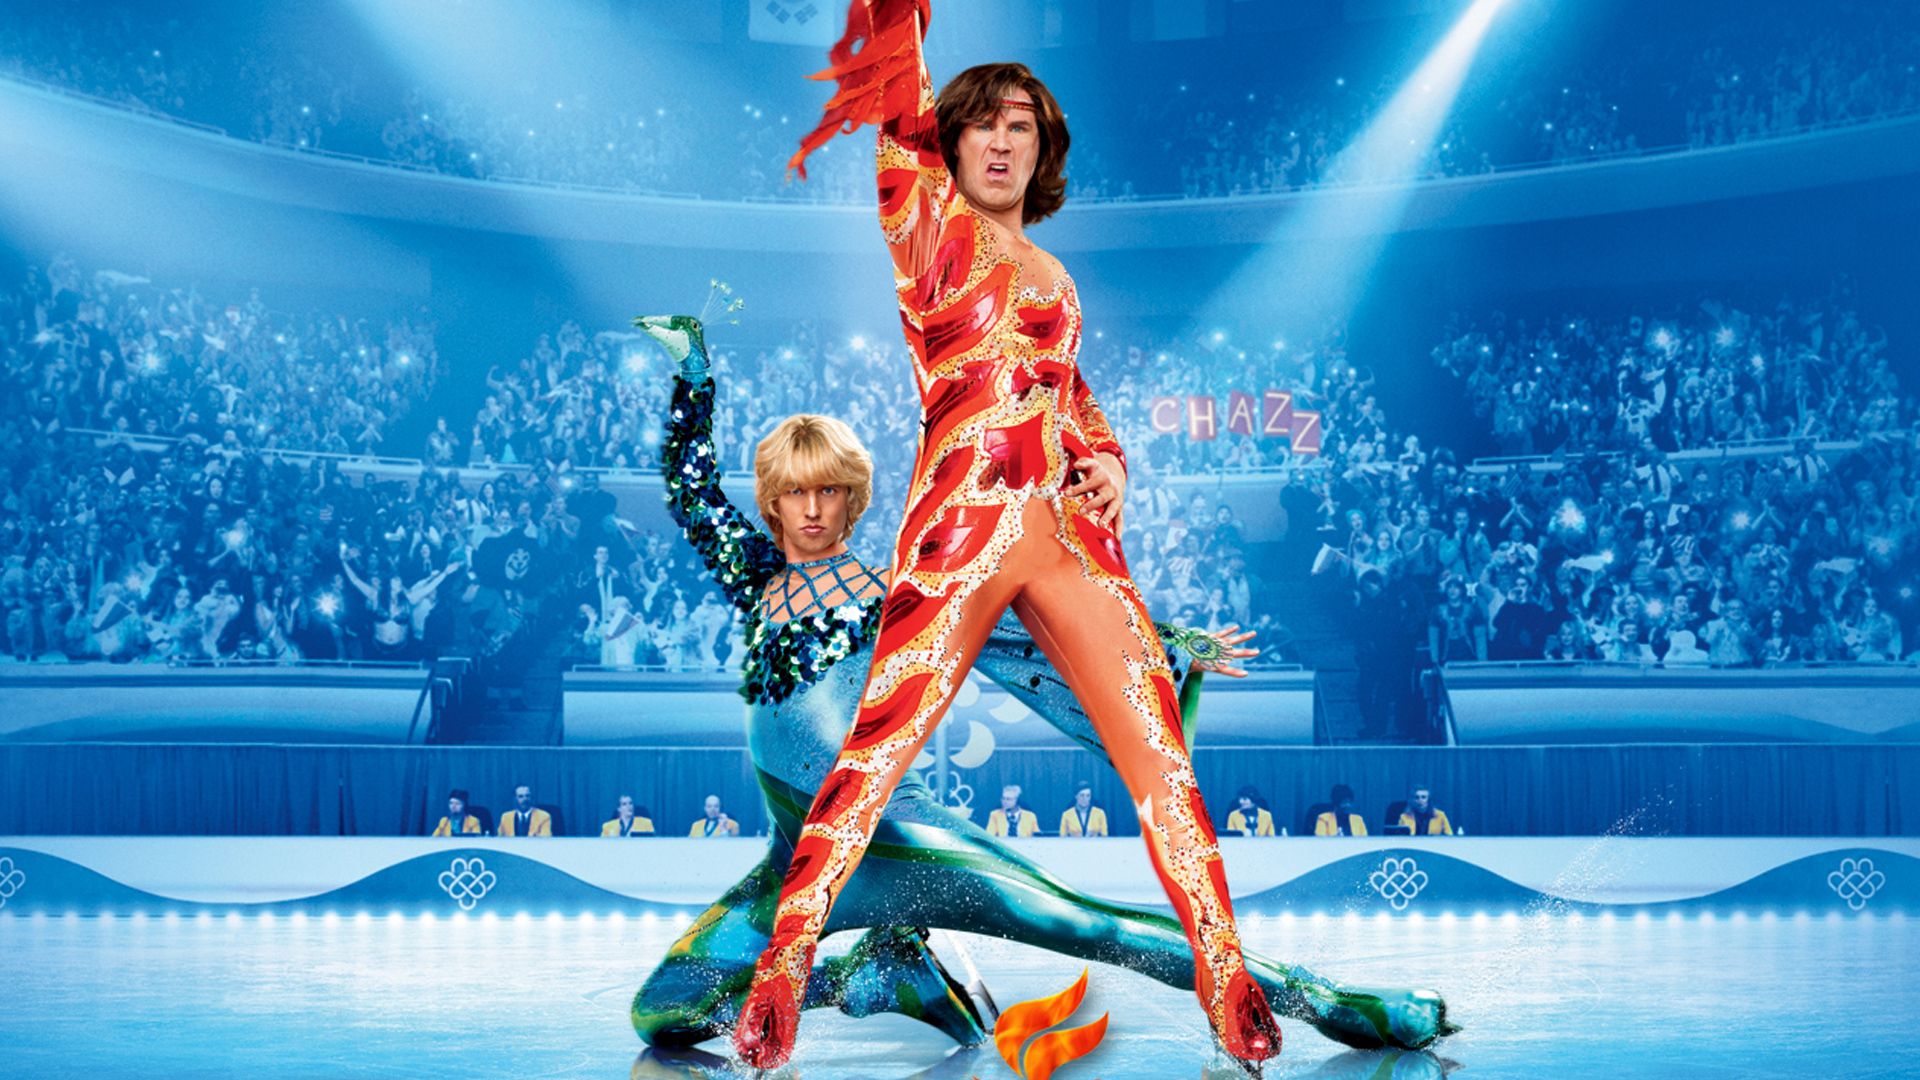 Blades Of Glory Full Movie Free Download